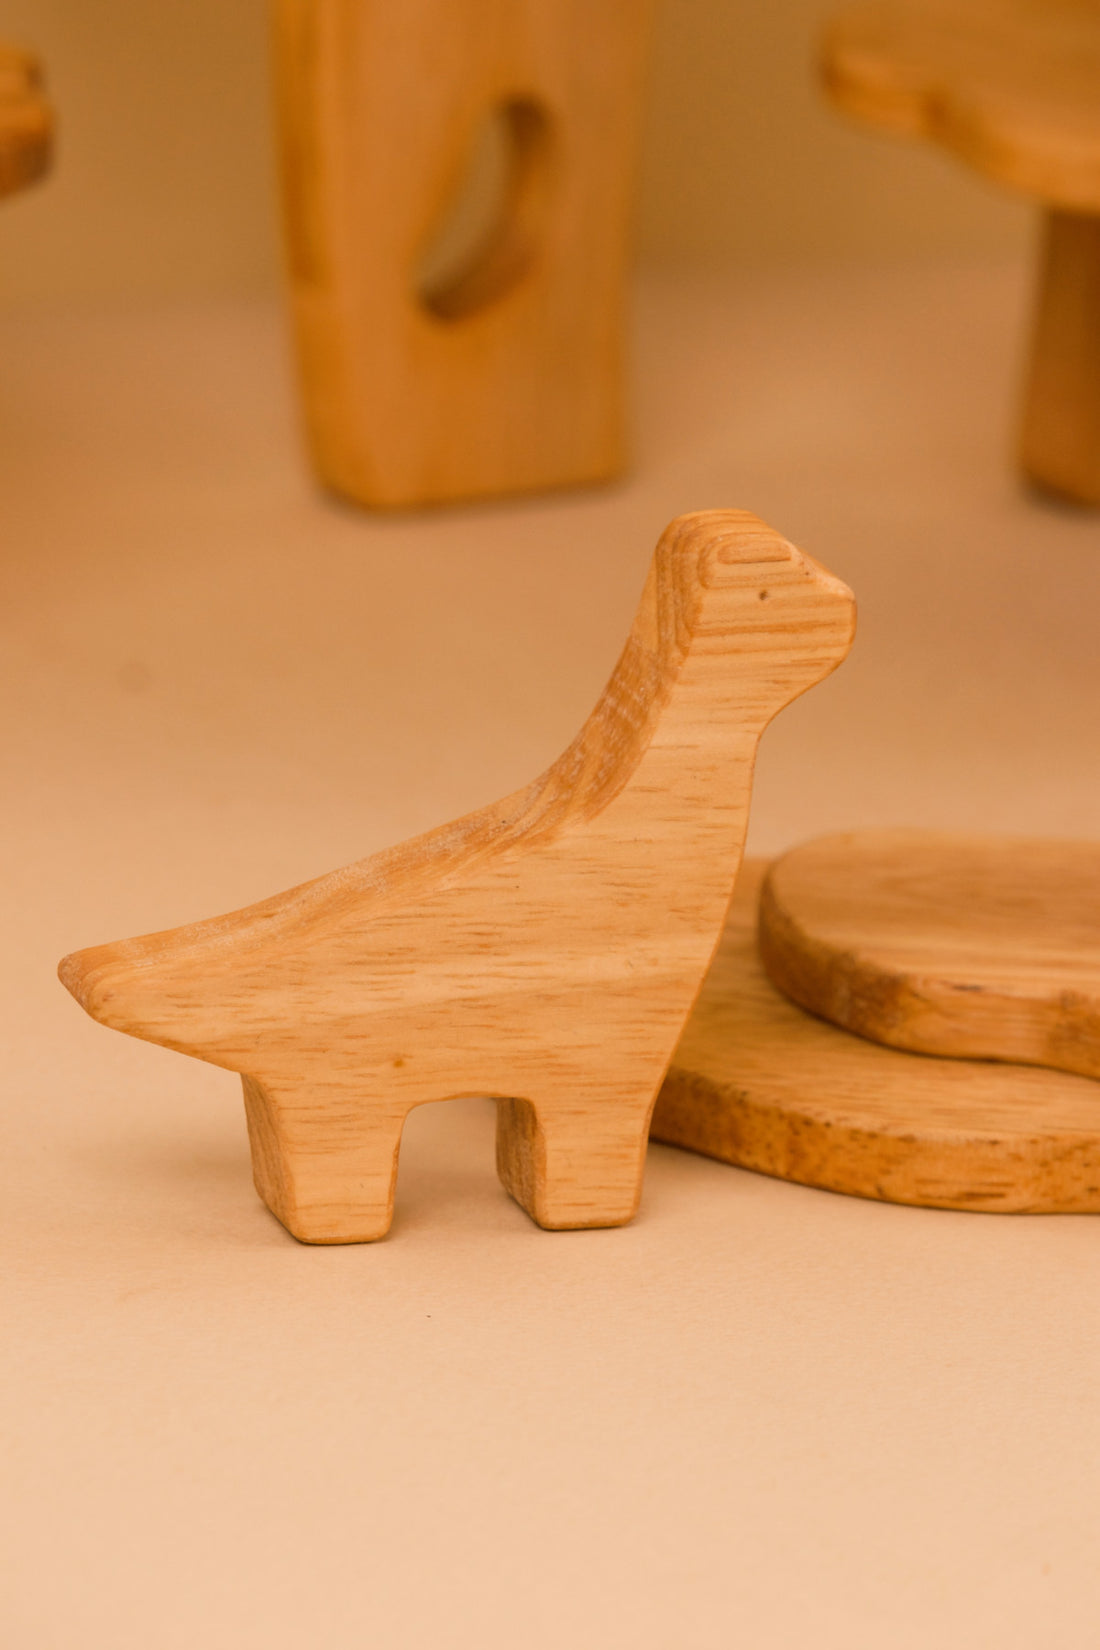 How Wooden Toys Foster Emotional and Social Growth